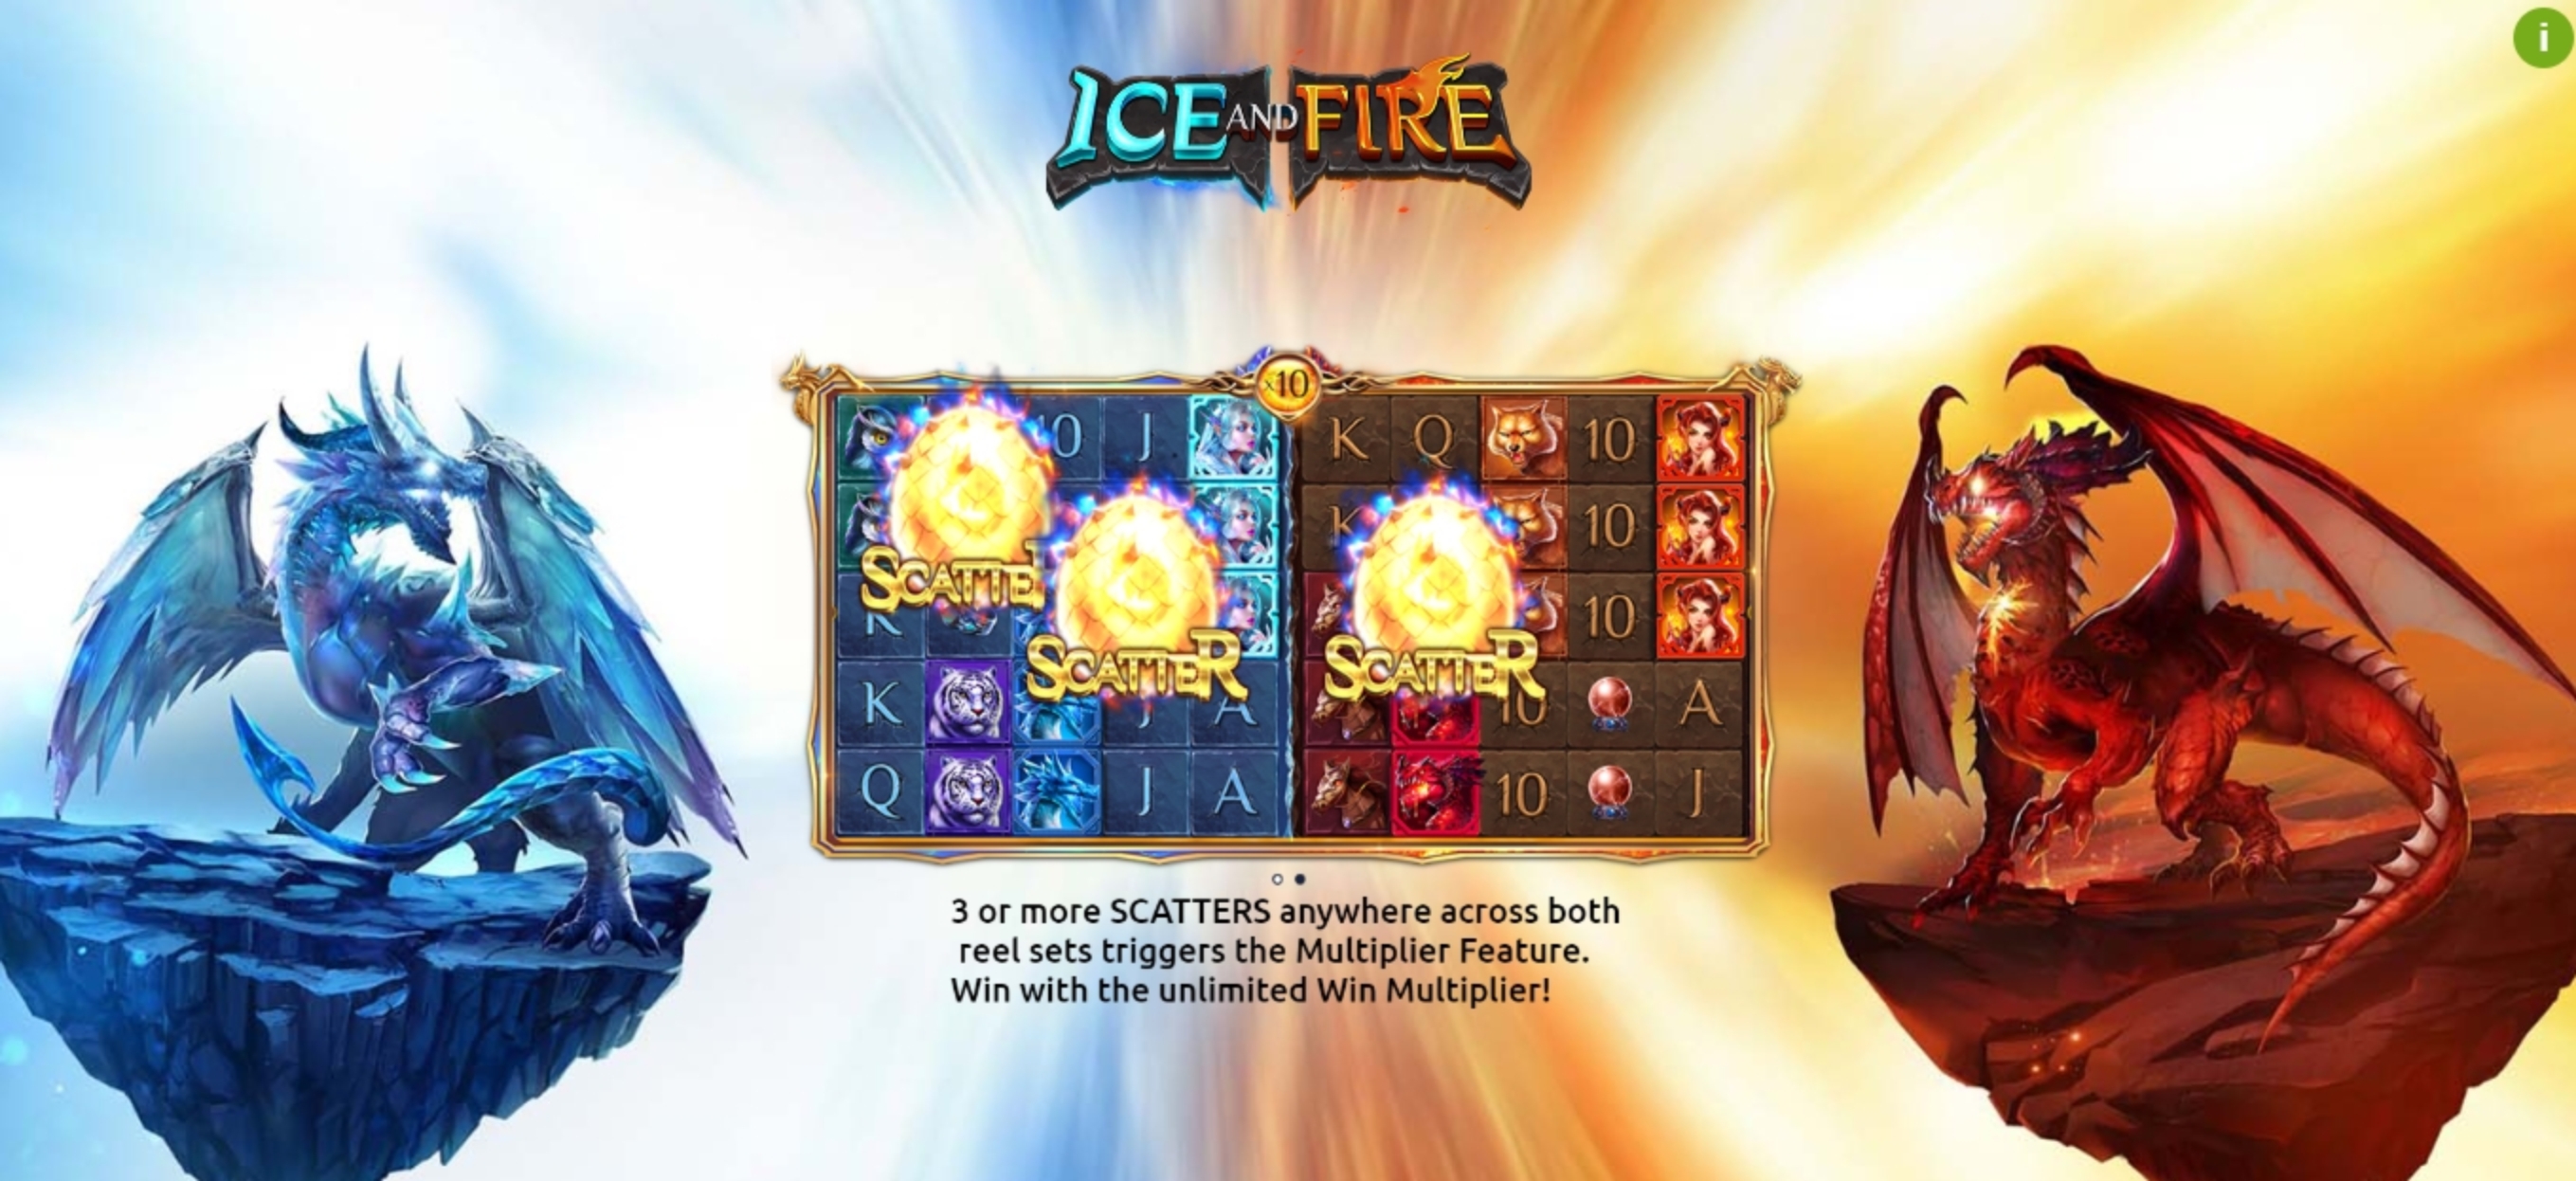 Play Ice and Fire Free Casino Slot Game by Dreamtech Gaming